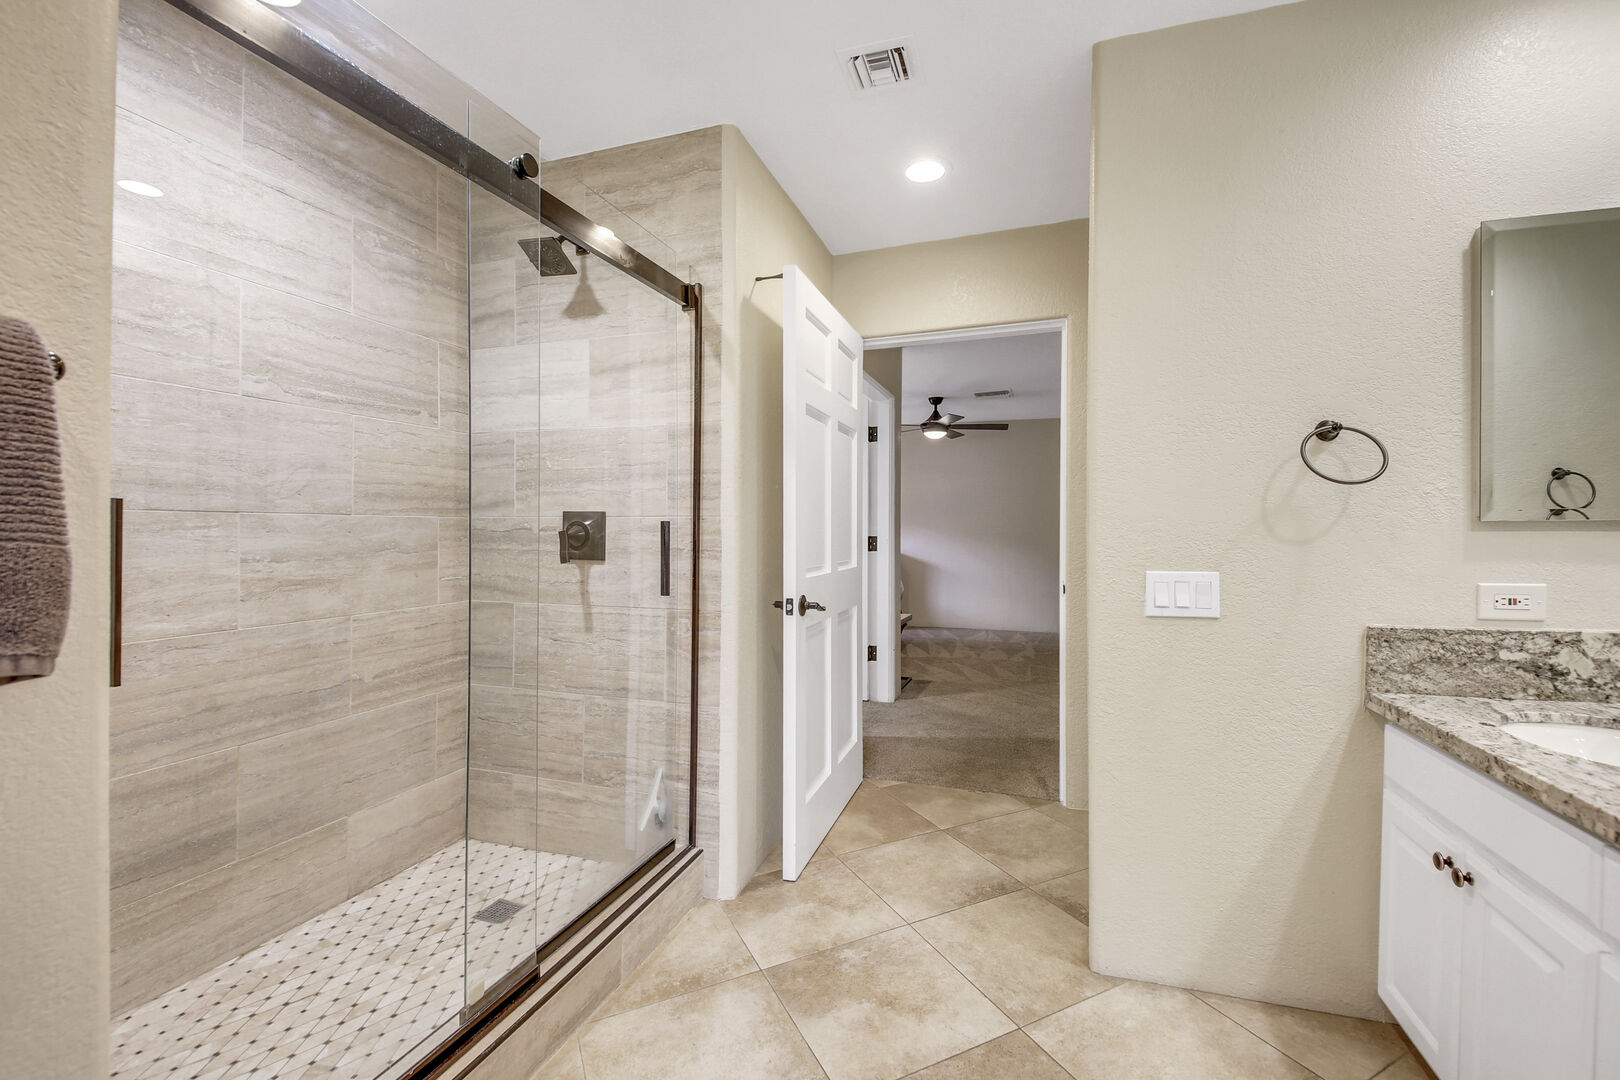 Shared, jack and jill bathroom features a tile shower, and double vanity sinks.